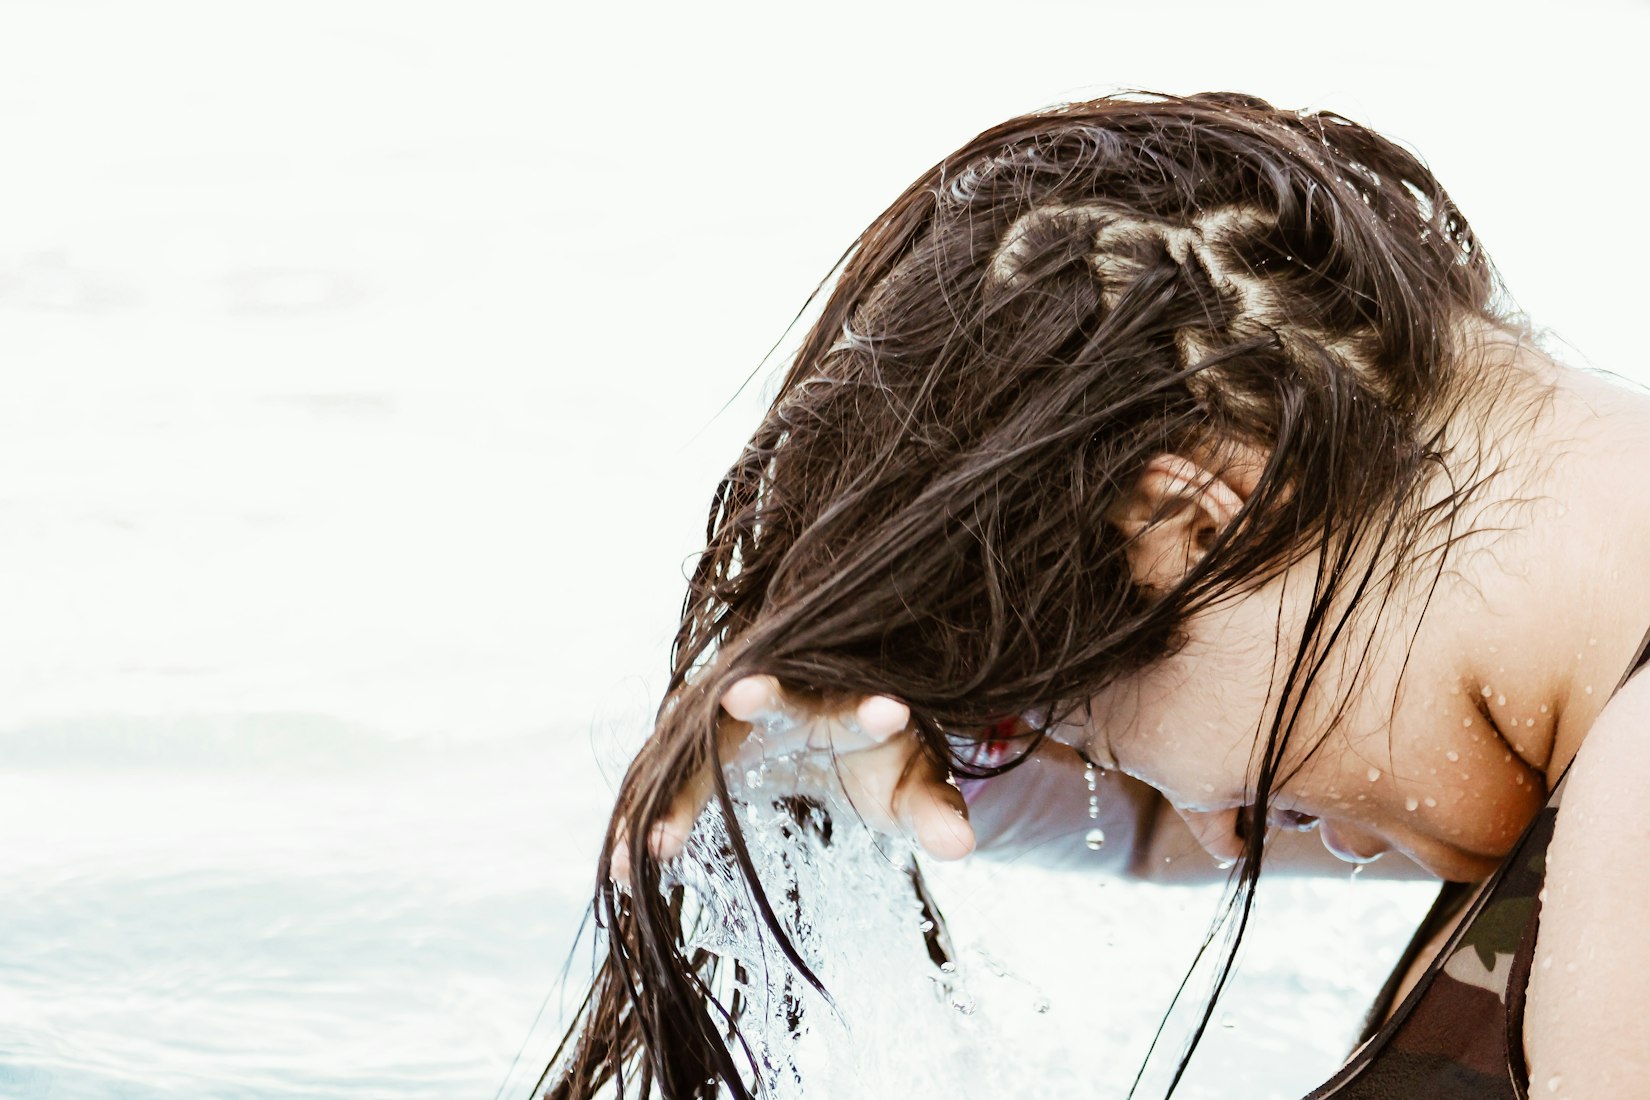 Wash Your Hair Regularly With Nice-Smelling Shampoo